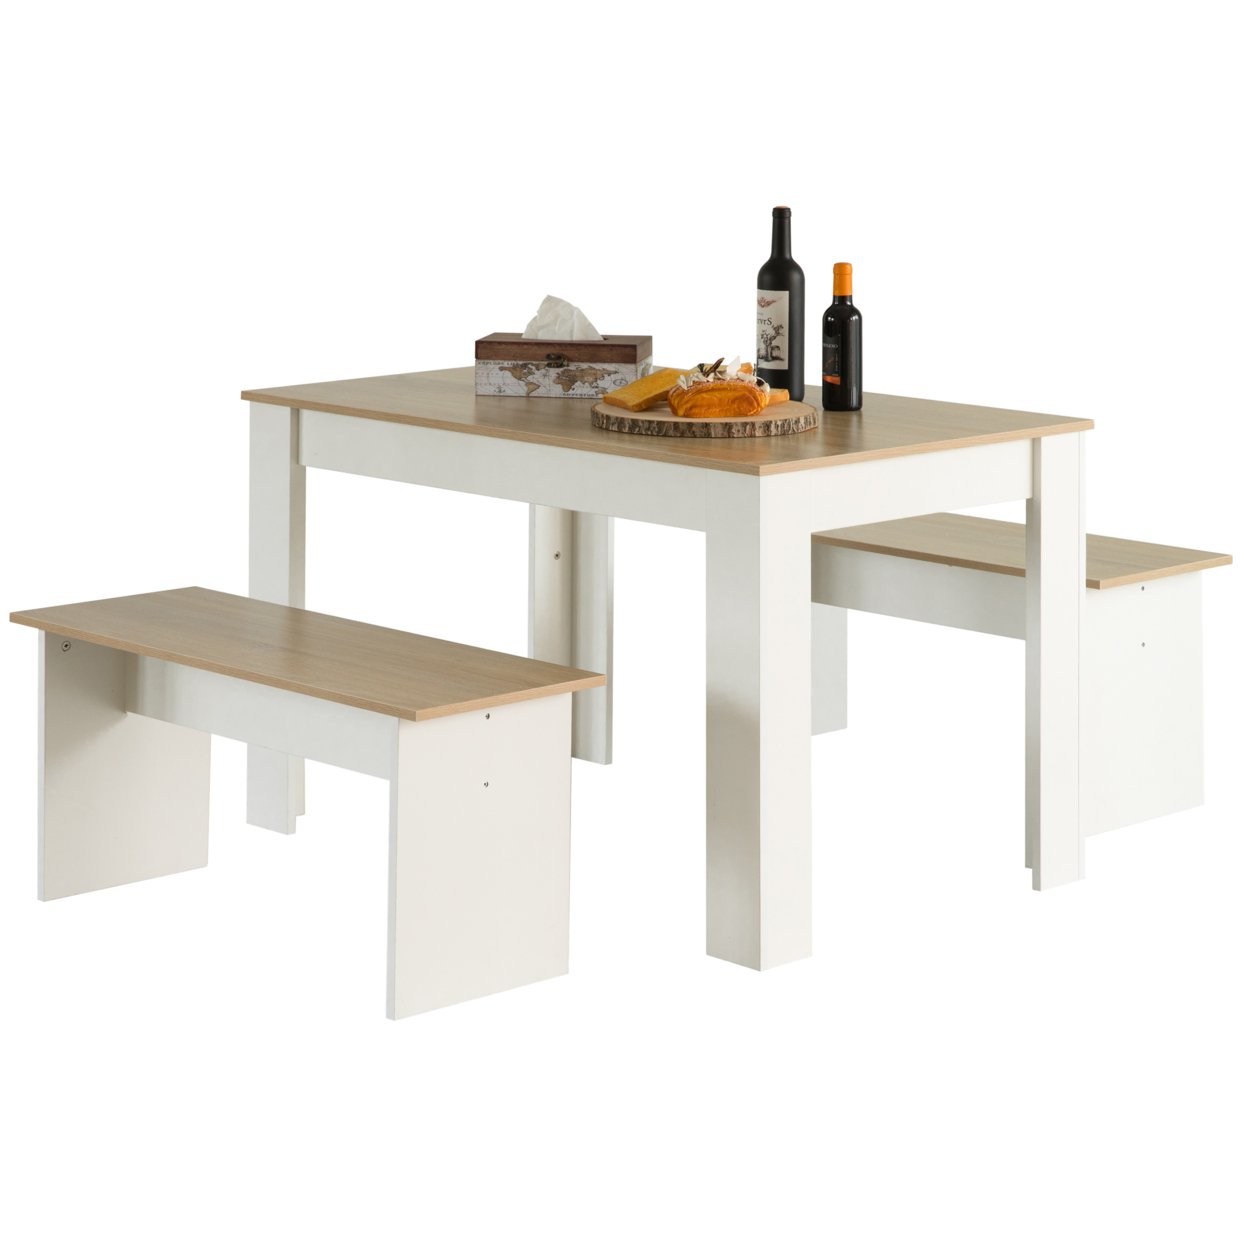 White Modern Wooden Dining Table With Two Benches, Three Piece Set, Writing Desk